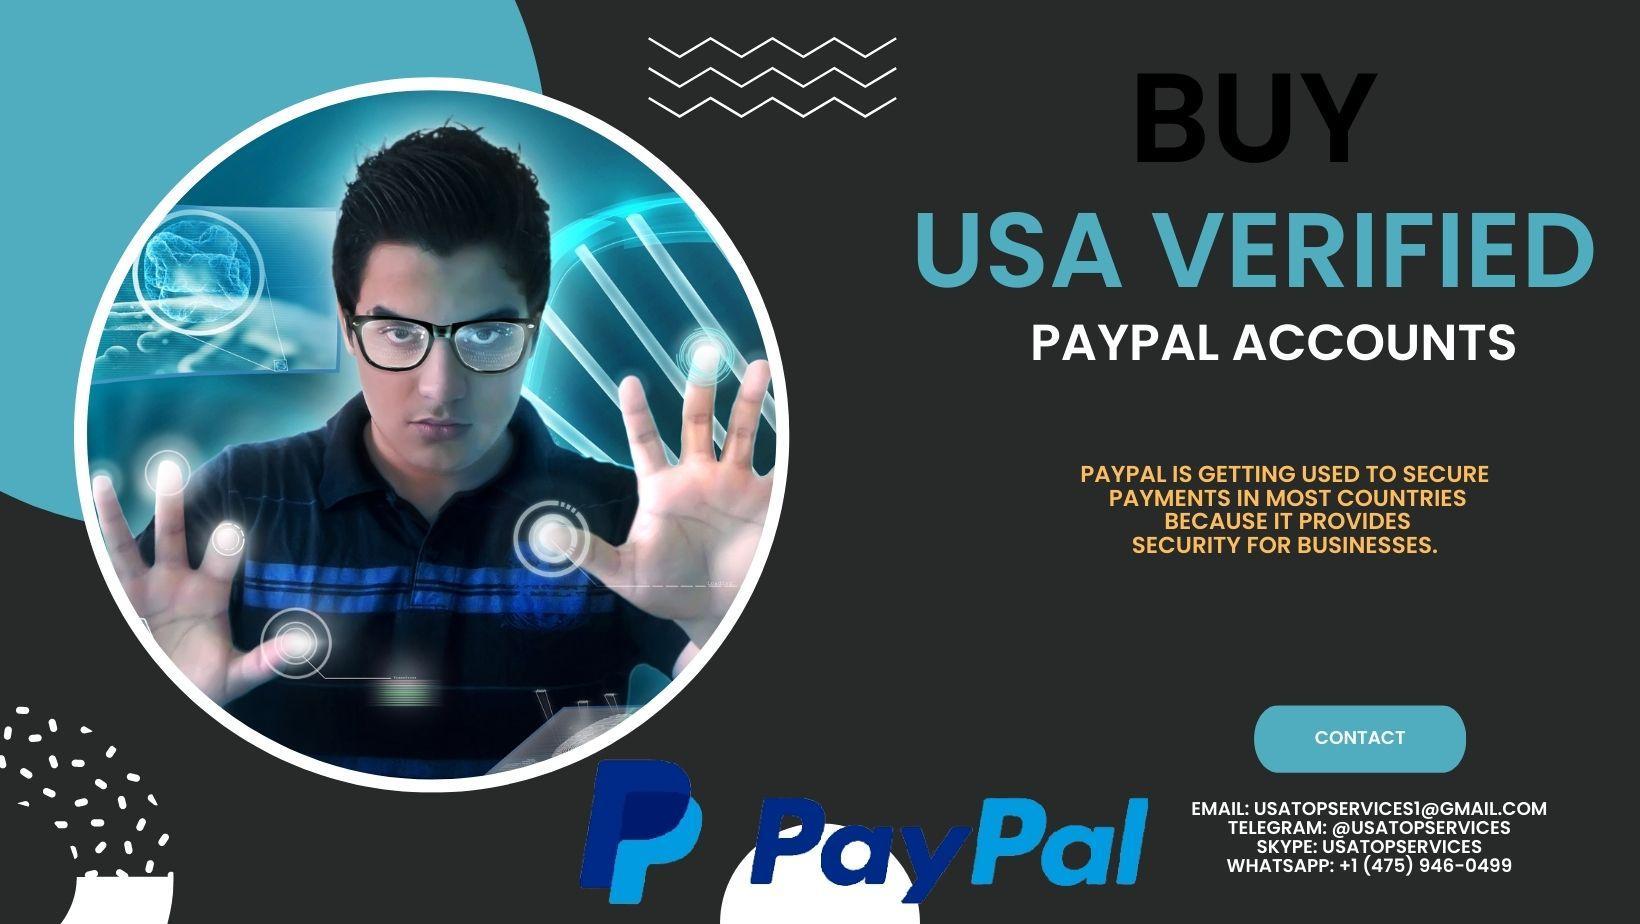 How to Create & Verify a PayPal Account [Definitive Guide]